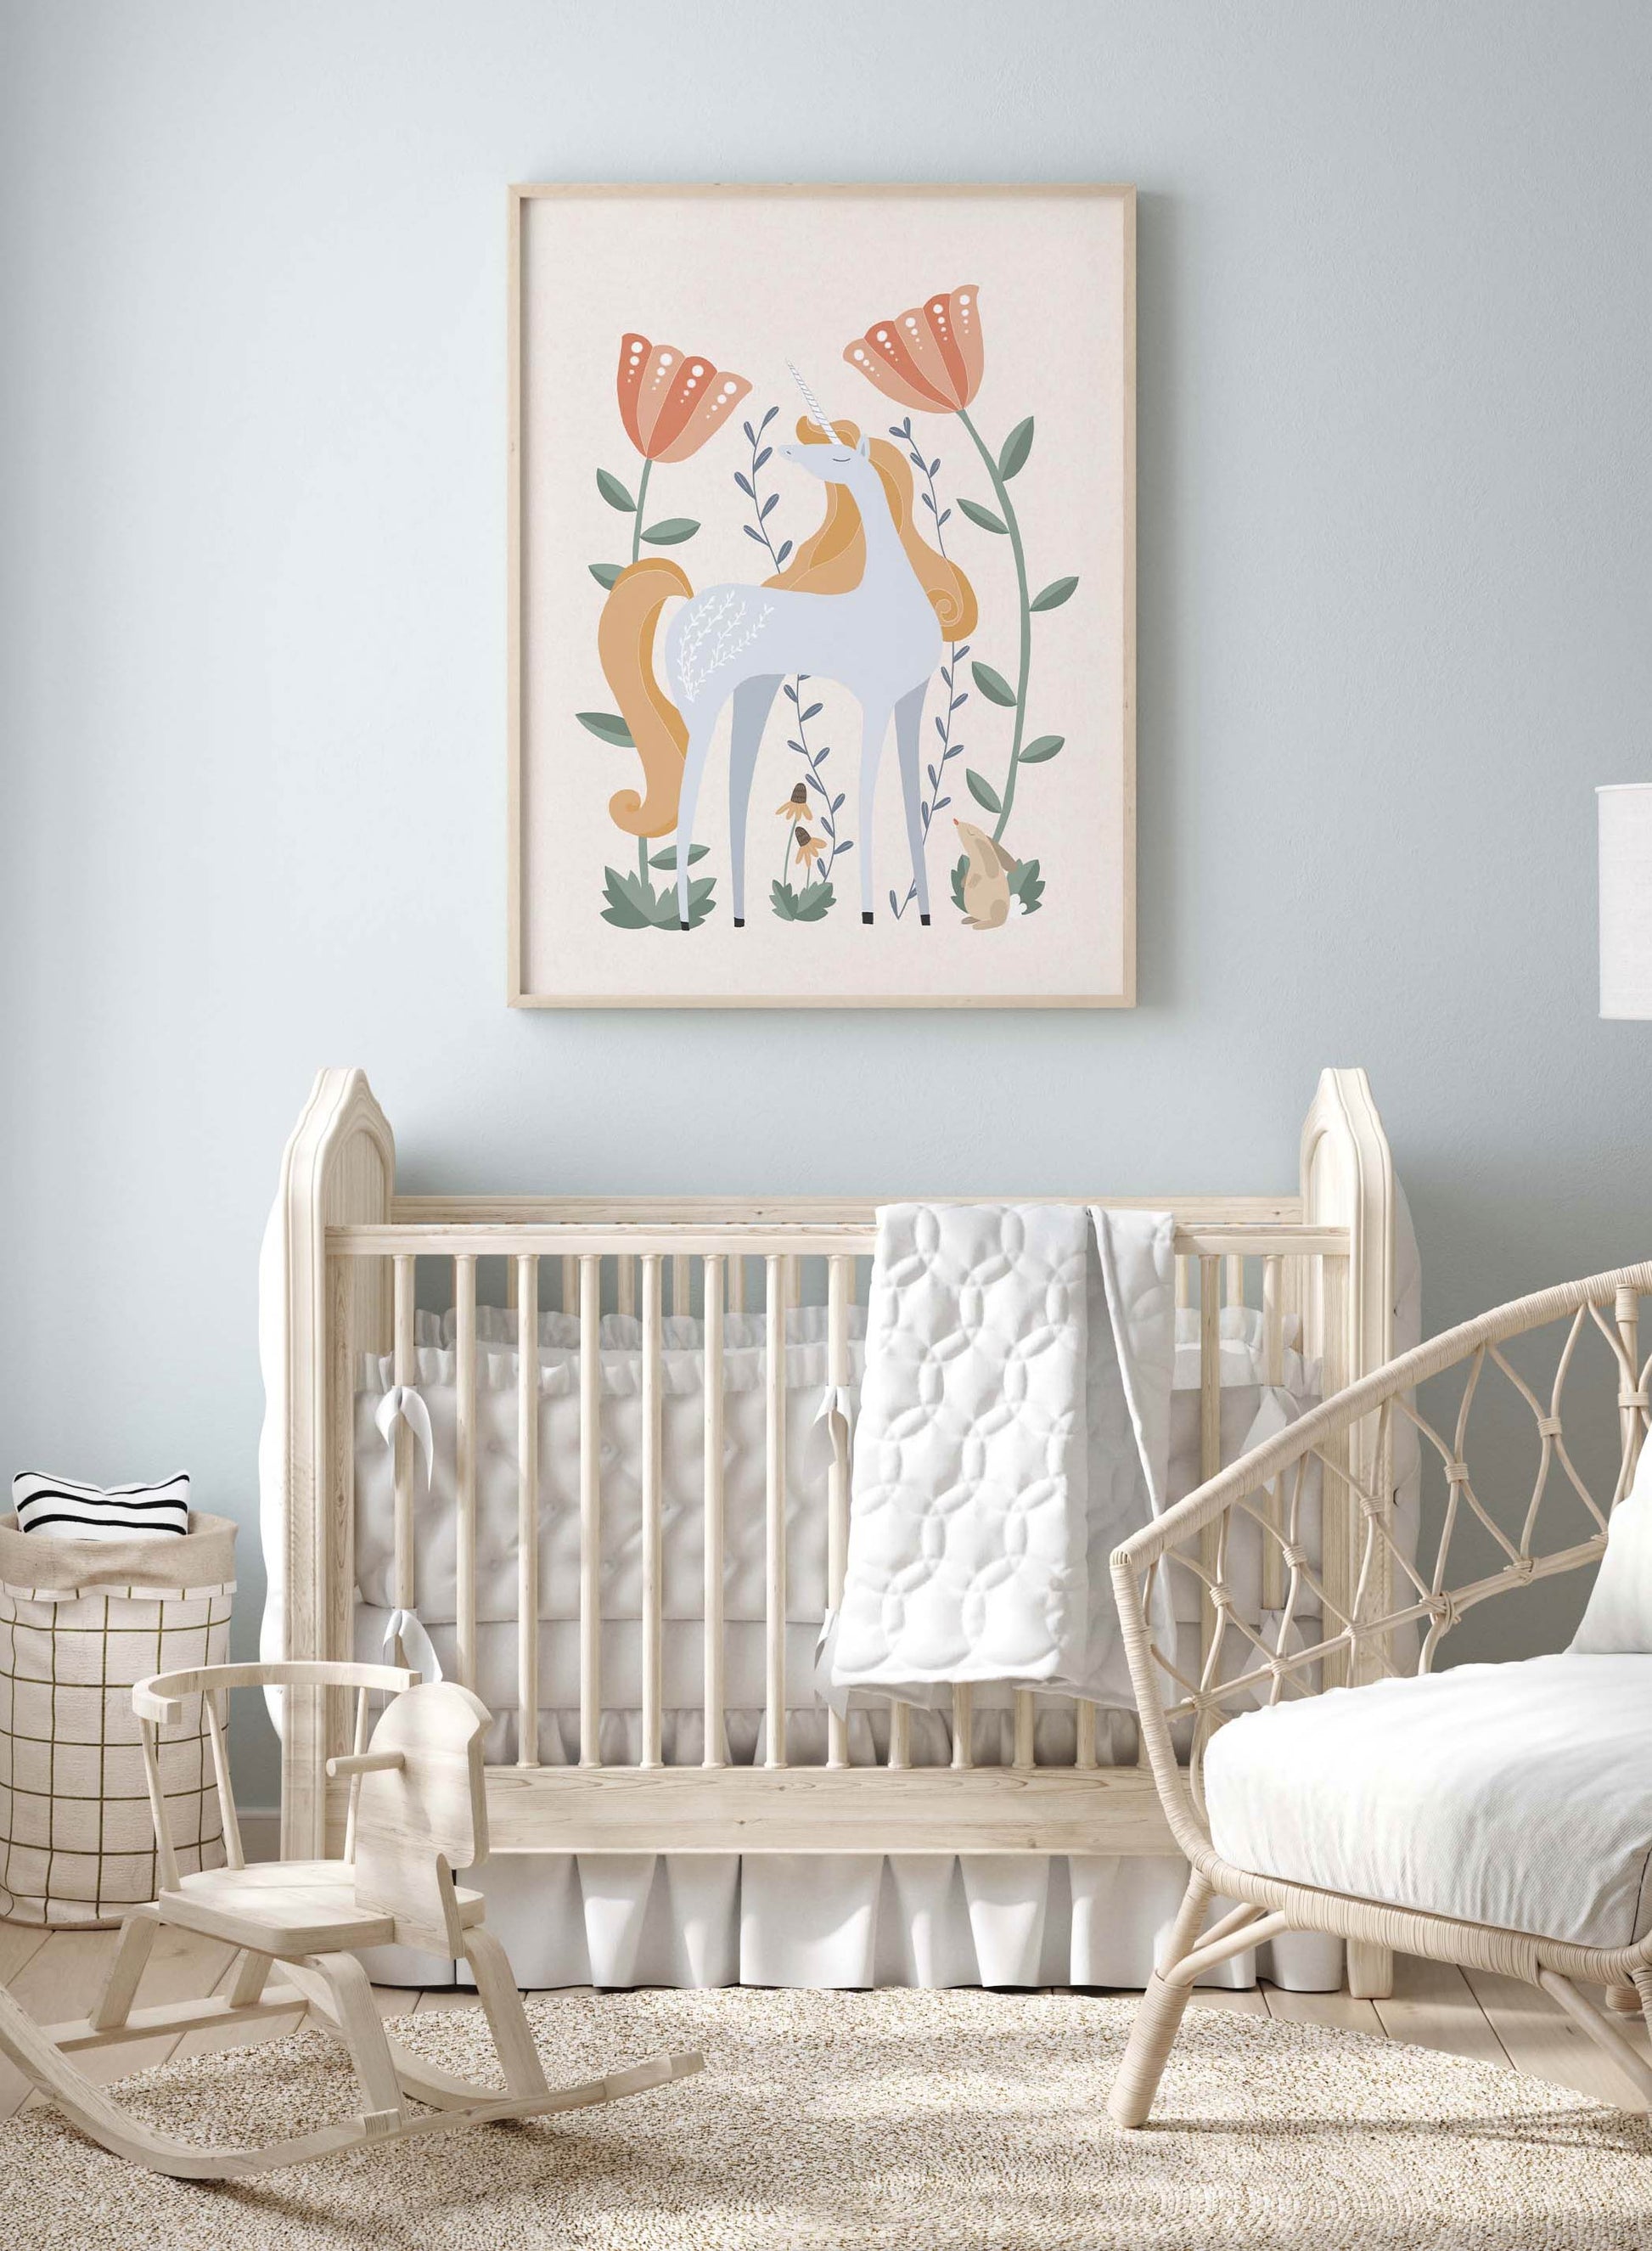 Sassy Unicorn is a minimalist illustration by Opposite Wall of a beautiful unicorn enjoying its time in nature with tall flowers and a rabbit at its foot.